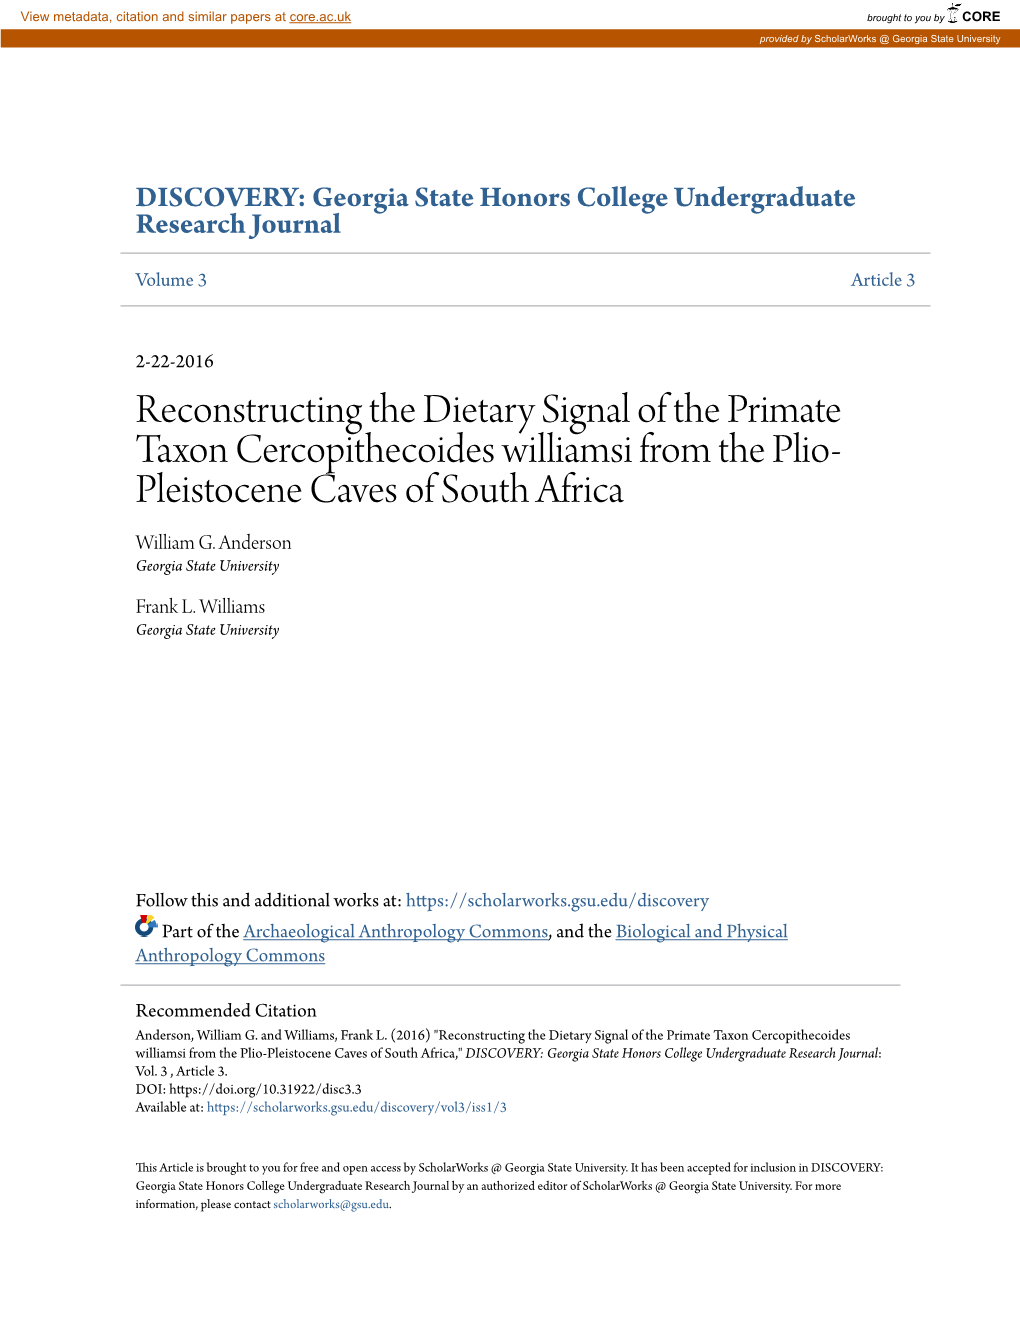 Reconstructing the Dietary Signal of the Primate Taxon Cercopithecoides Williamsi from the Plio- Pleistocene Caves of South Africa William G